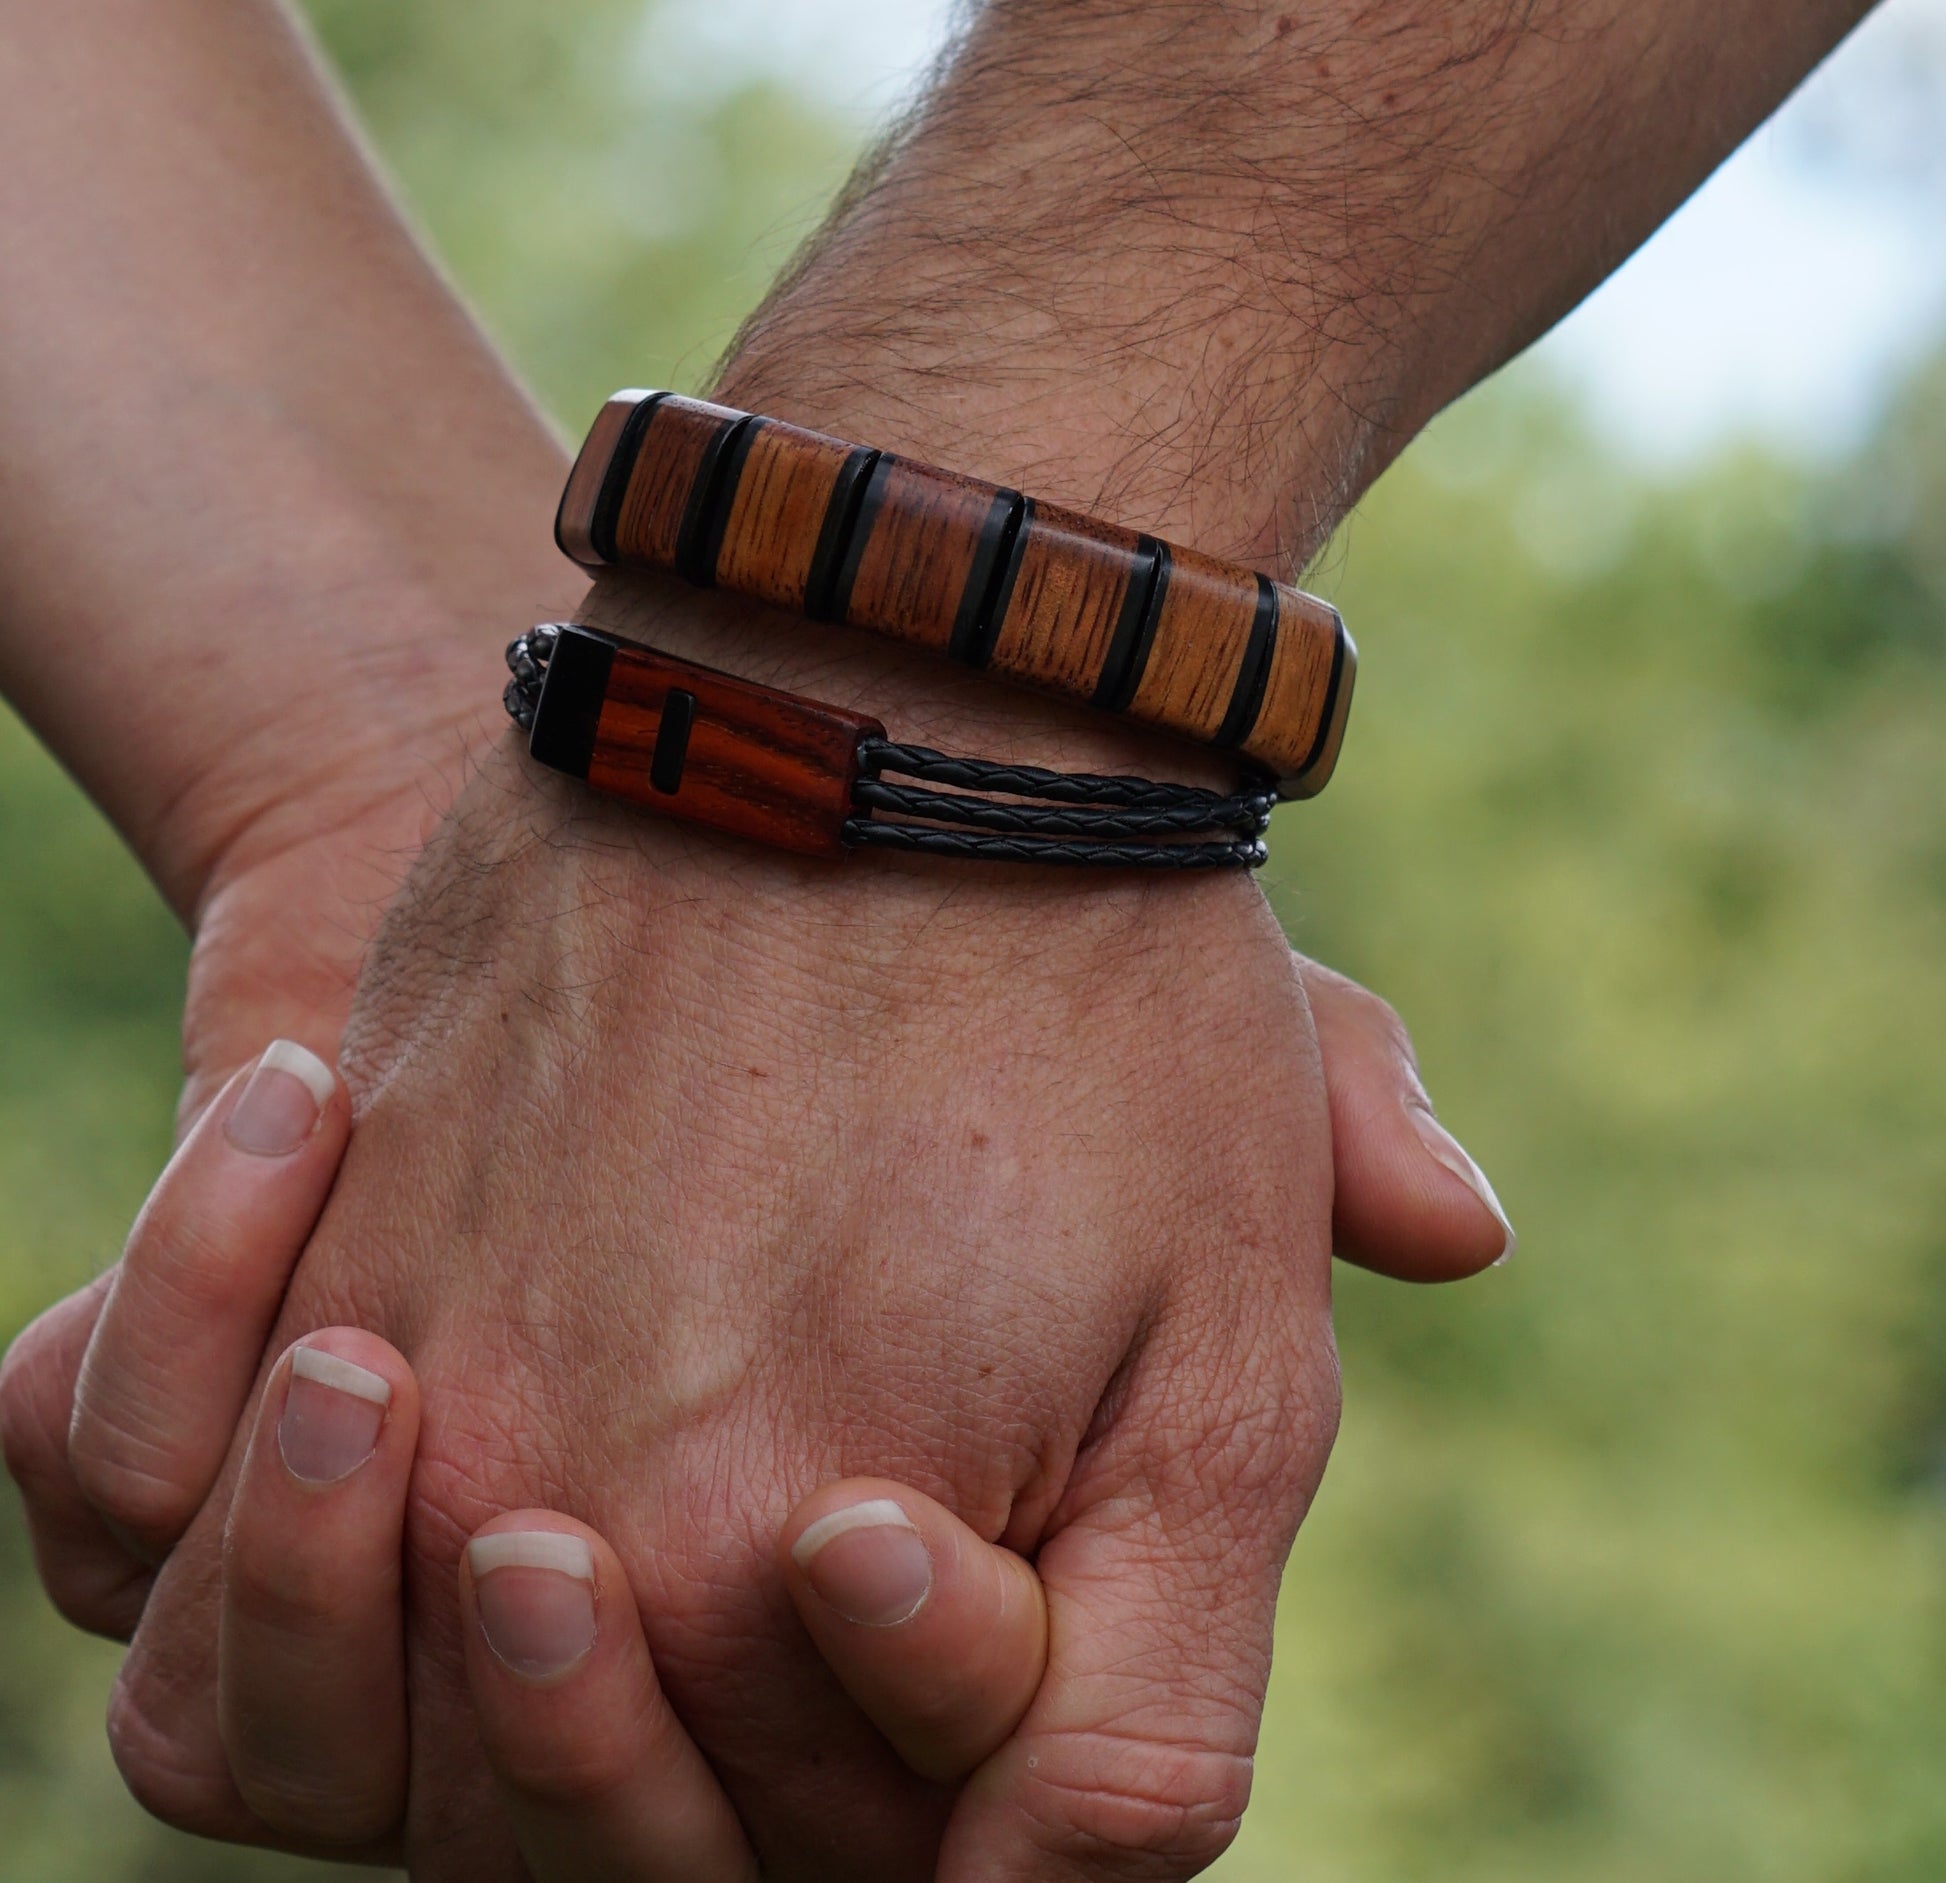 Bracelet - Wooden Clasp with Braided Leather Band Mix of Cocobolo and Ebony / Medium